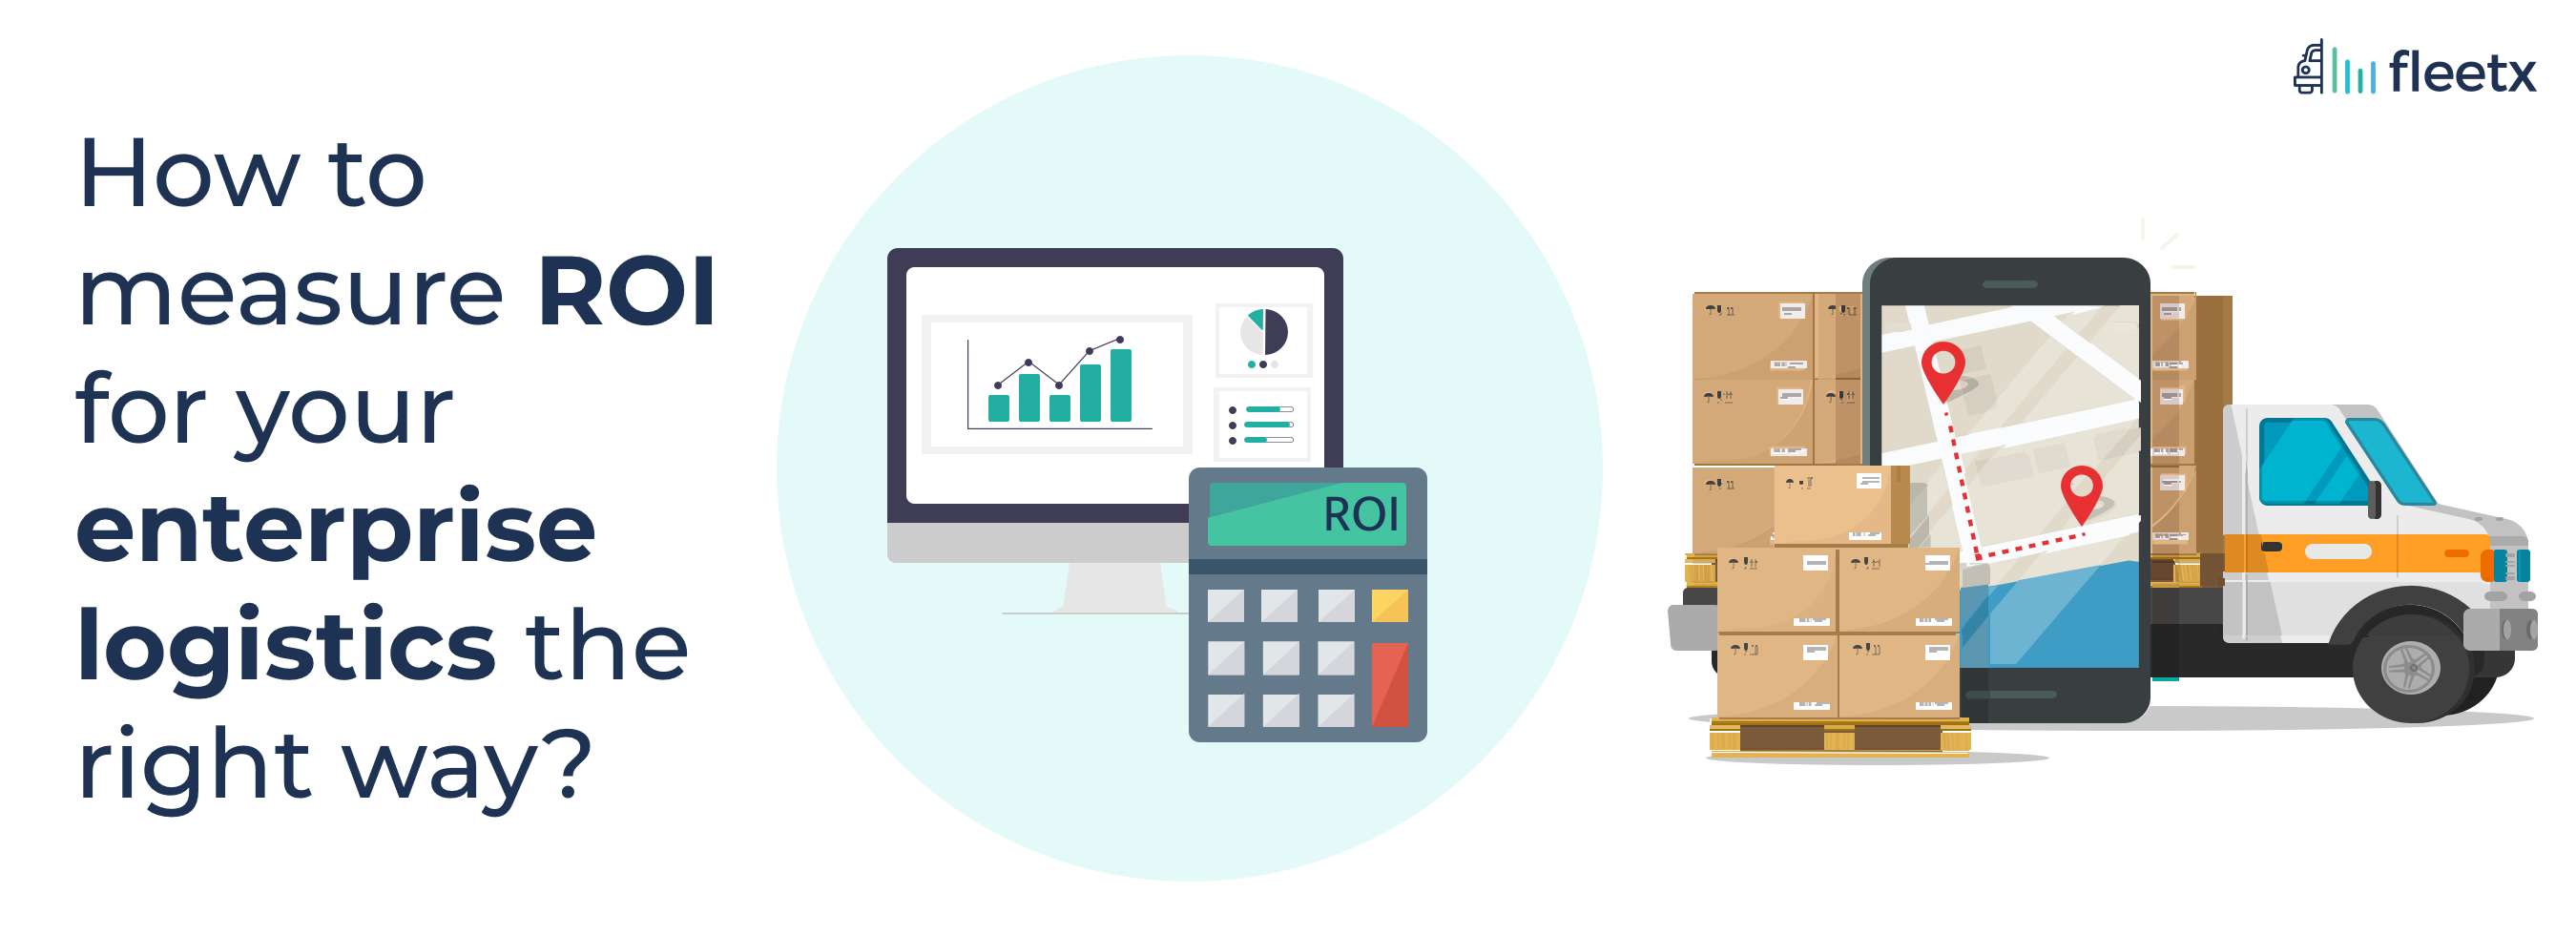 How to measure ROI for your enterprise logistics the right way?